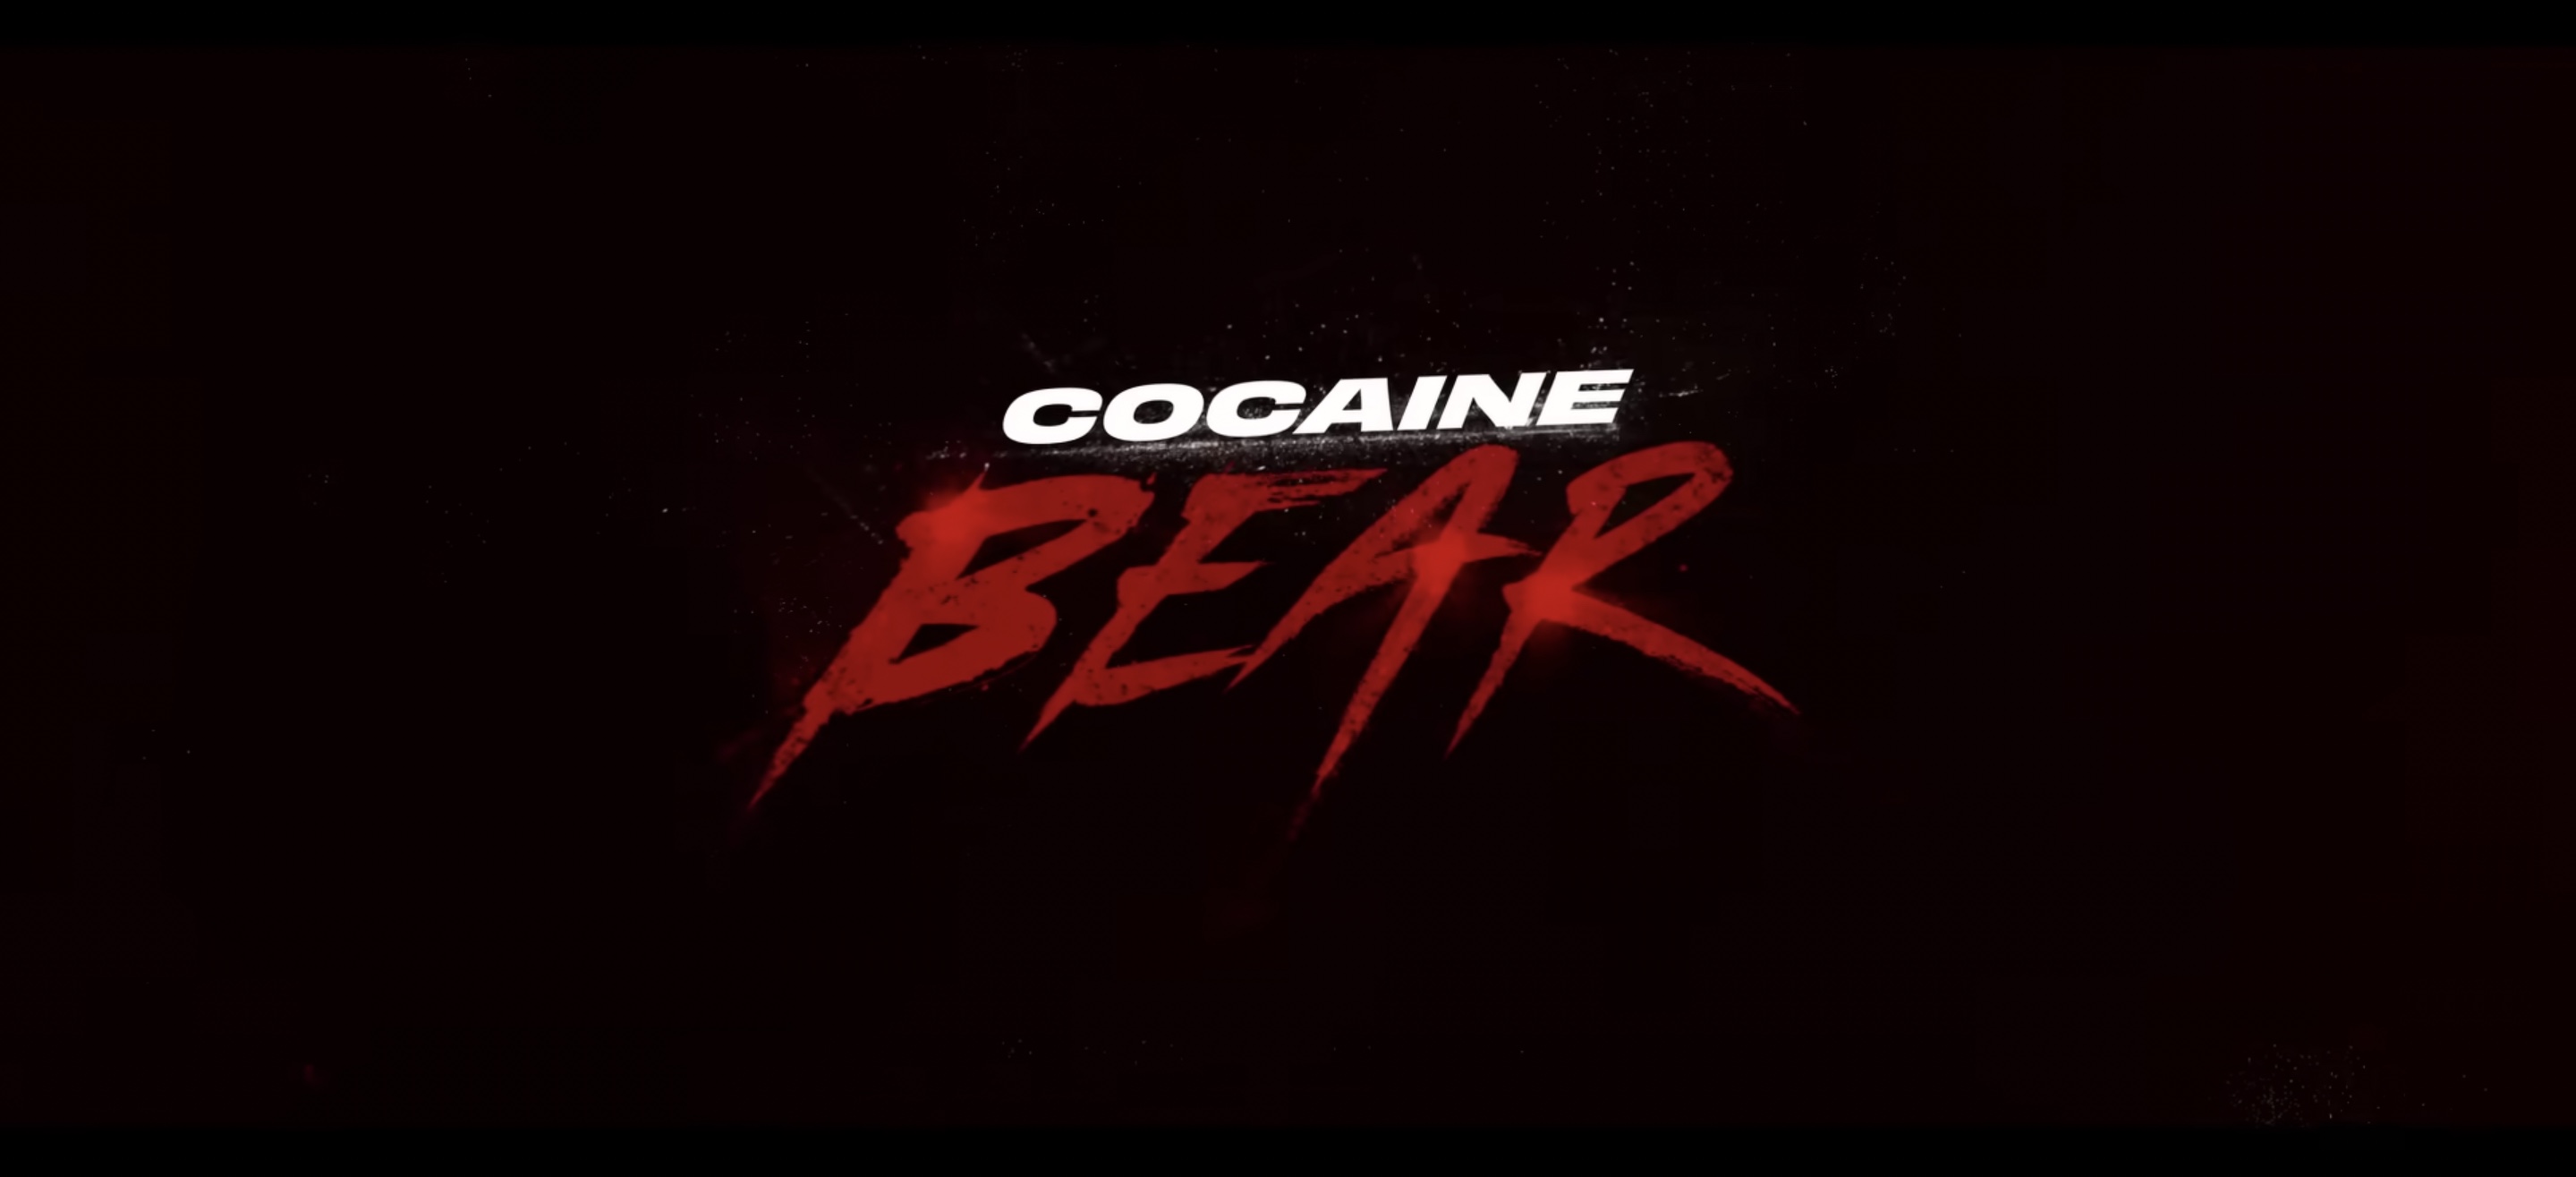 ‘Cocaine Bear’: No, a Coked Up Bear Never Went On a Murderous Rampage